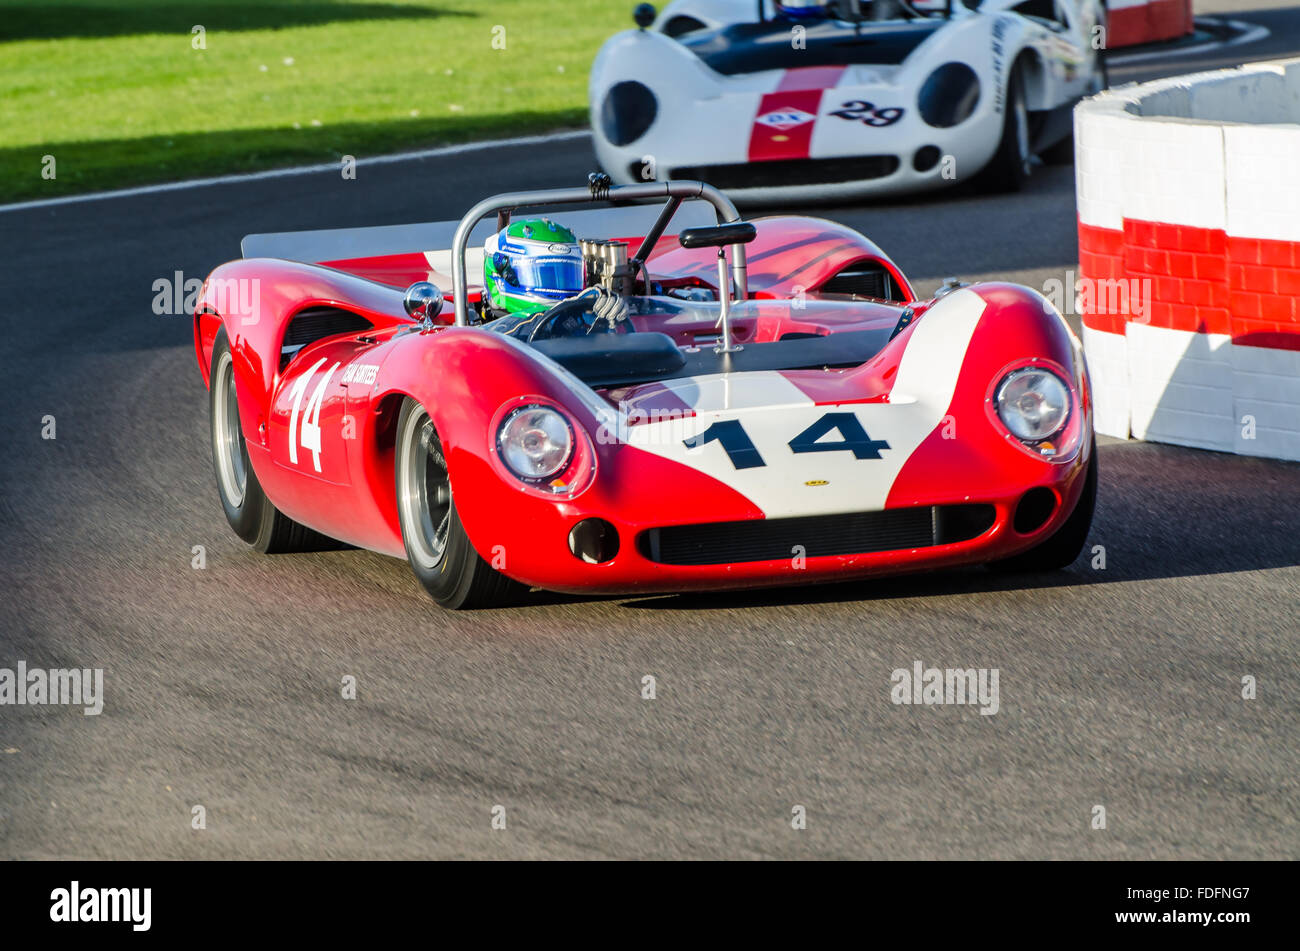 1966 Lola Chevrolet T70 Spyder  owned and raced by Philip Hall at the 2015 Goodwood Revival Stock Photo